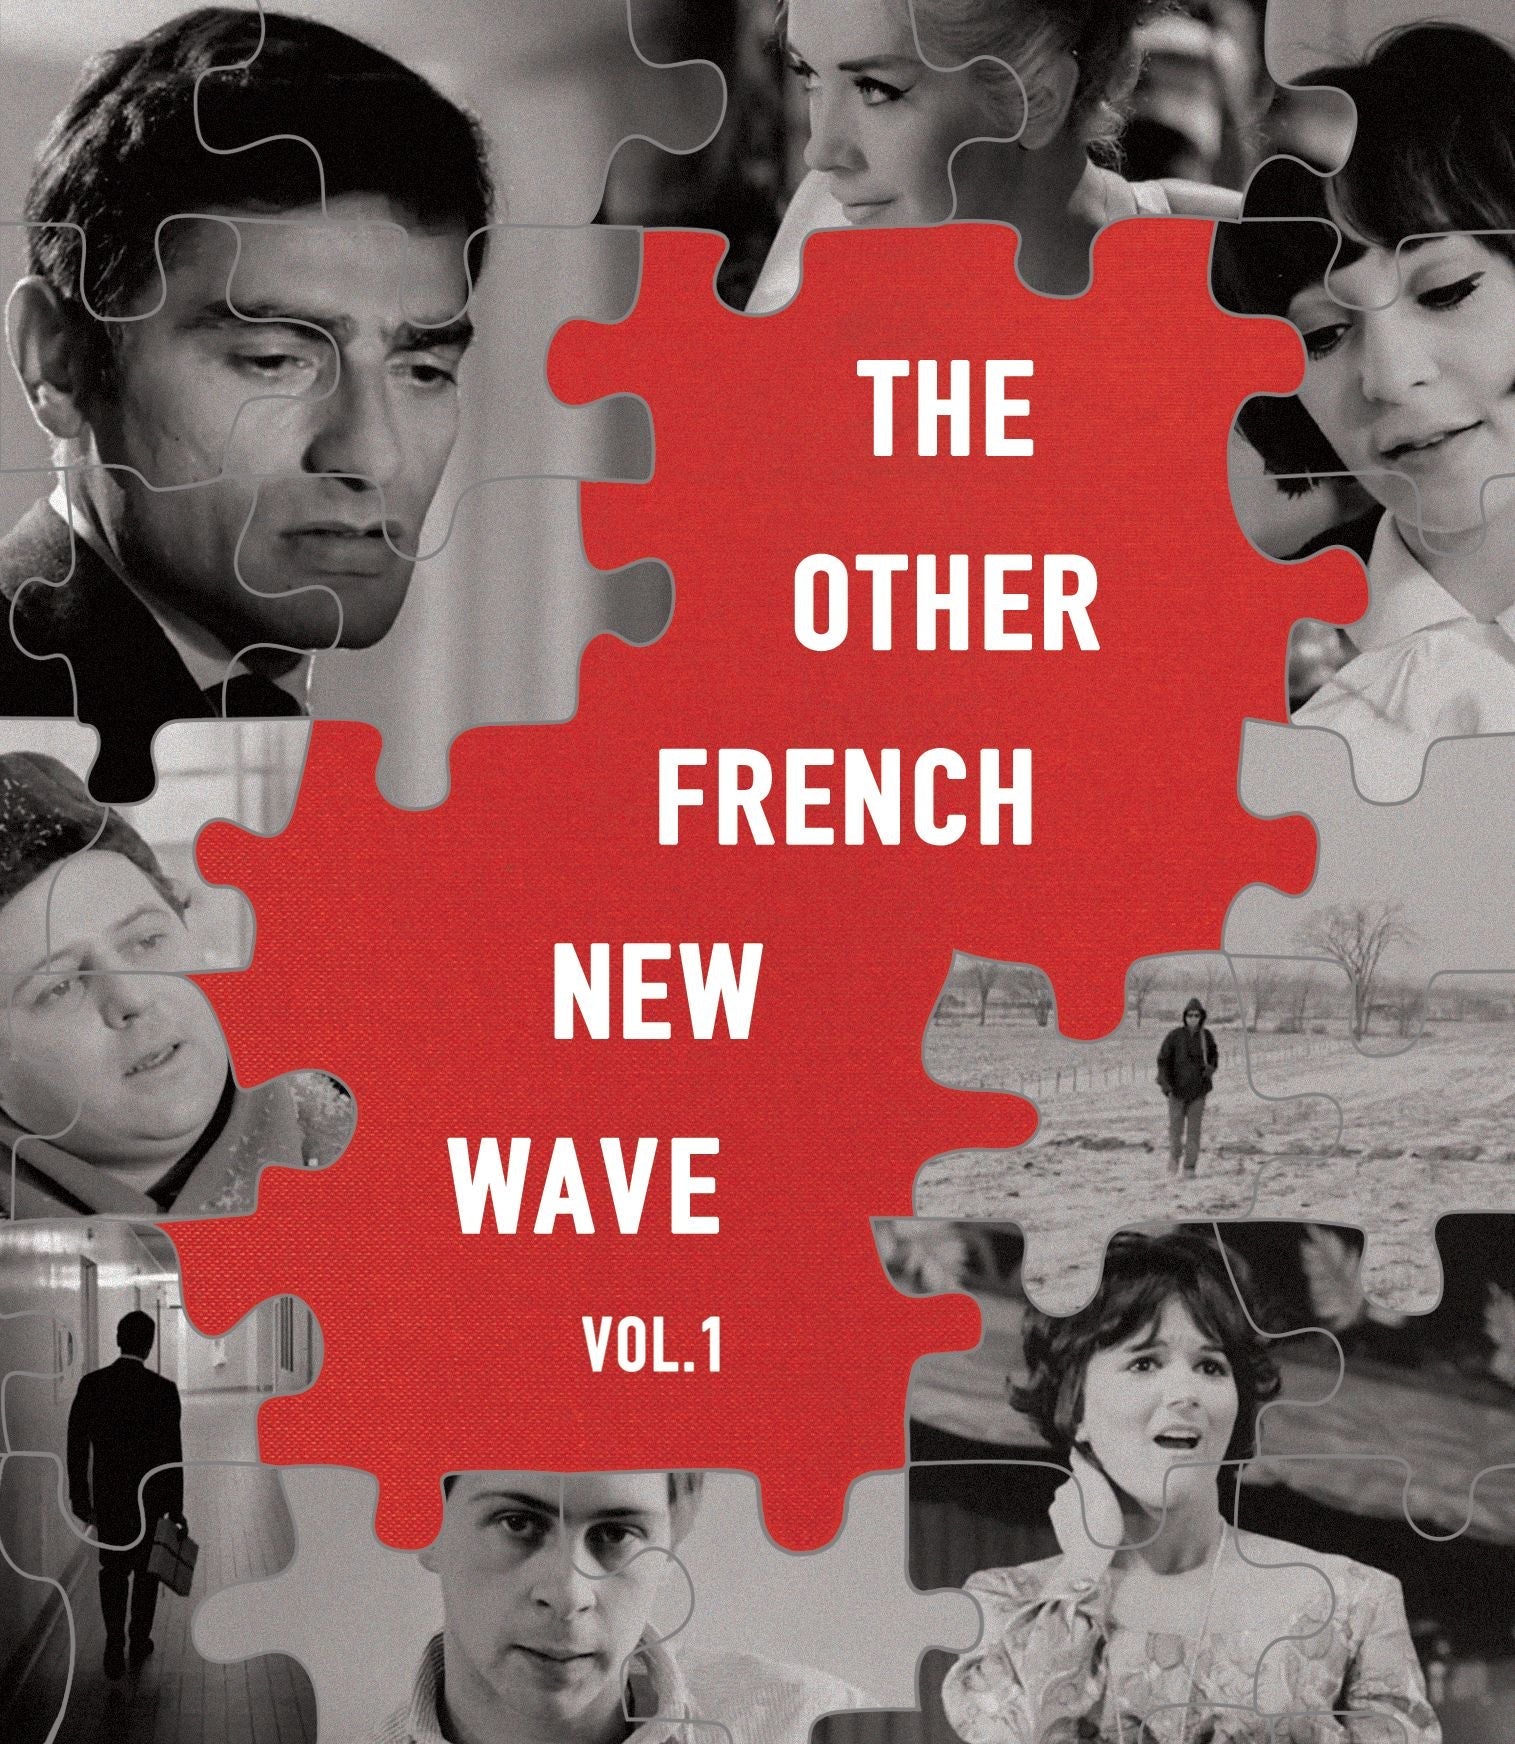 THE OTHER FRENCH NEW WAVE VOLUME 1 (LIMITED EDITION) BLU-RAY